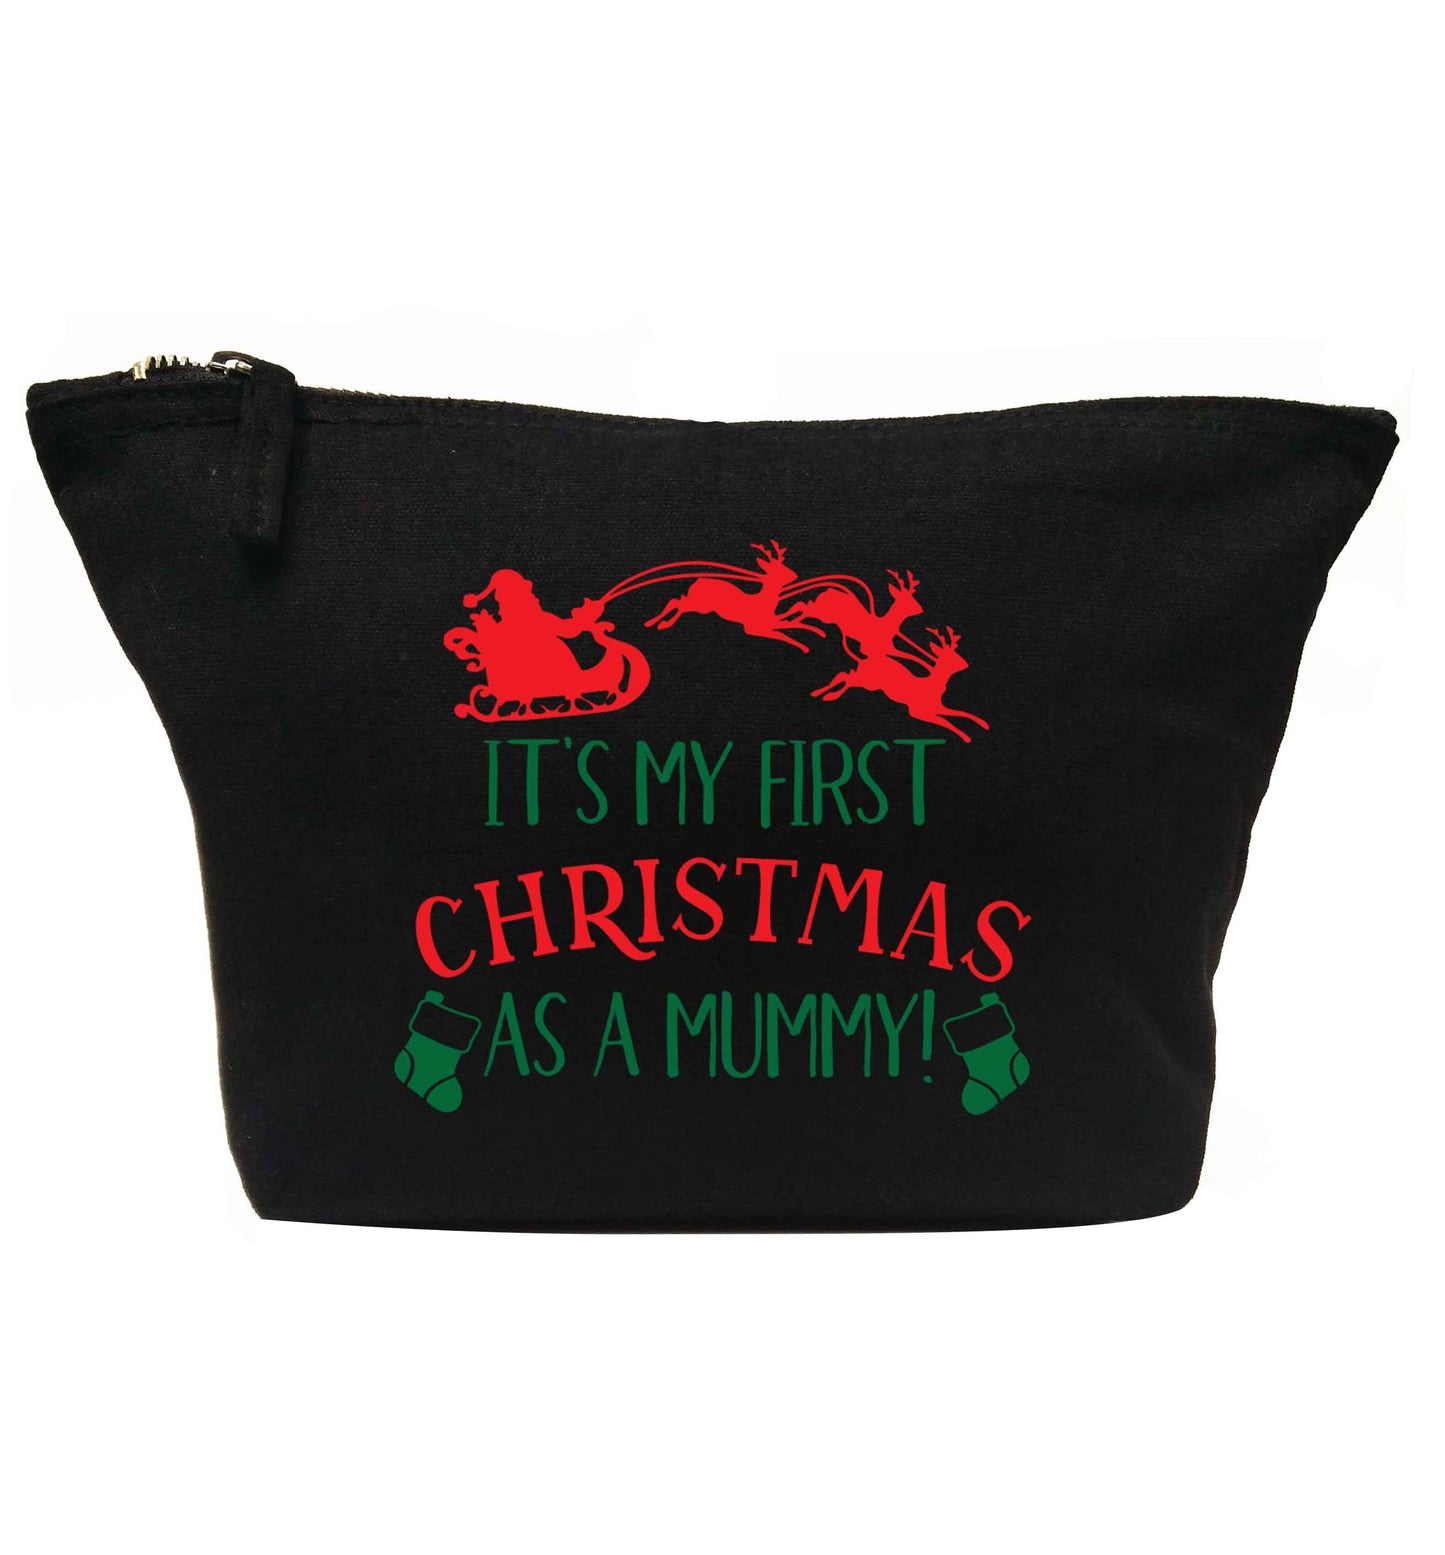 It's my first Christmas as a mummy | makeup / wash bag